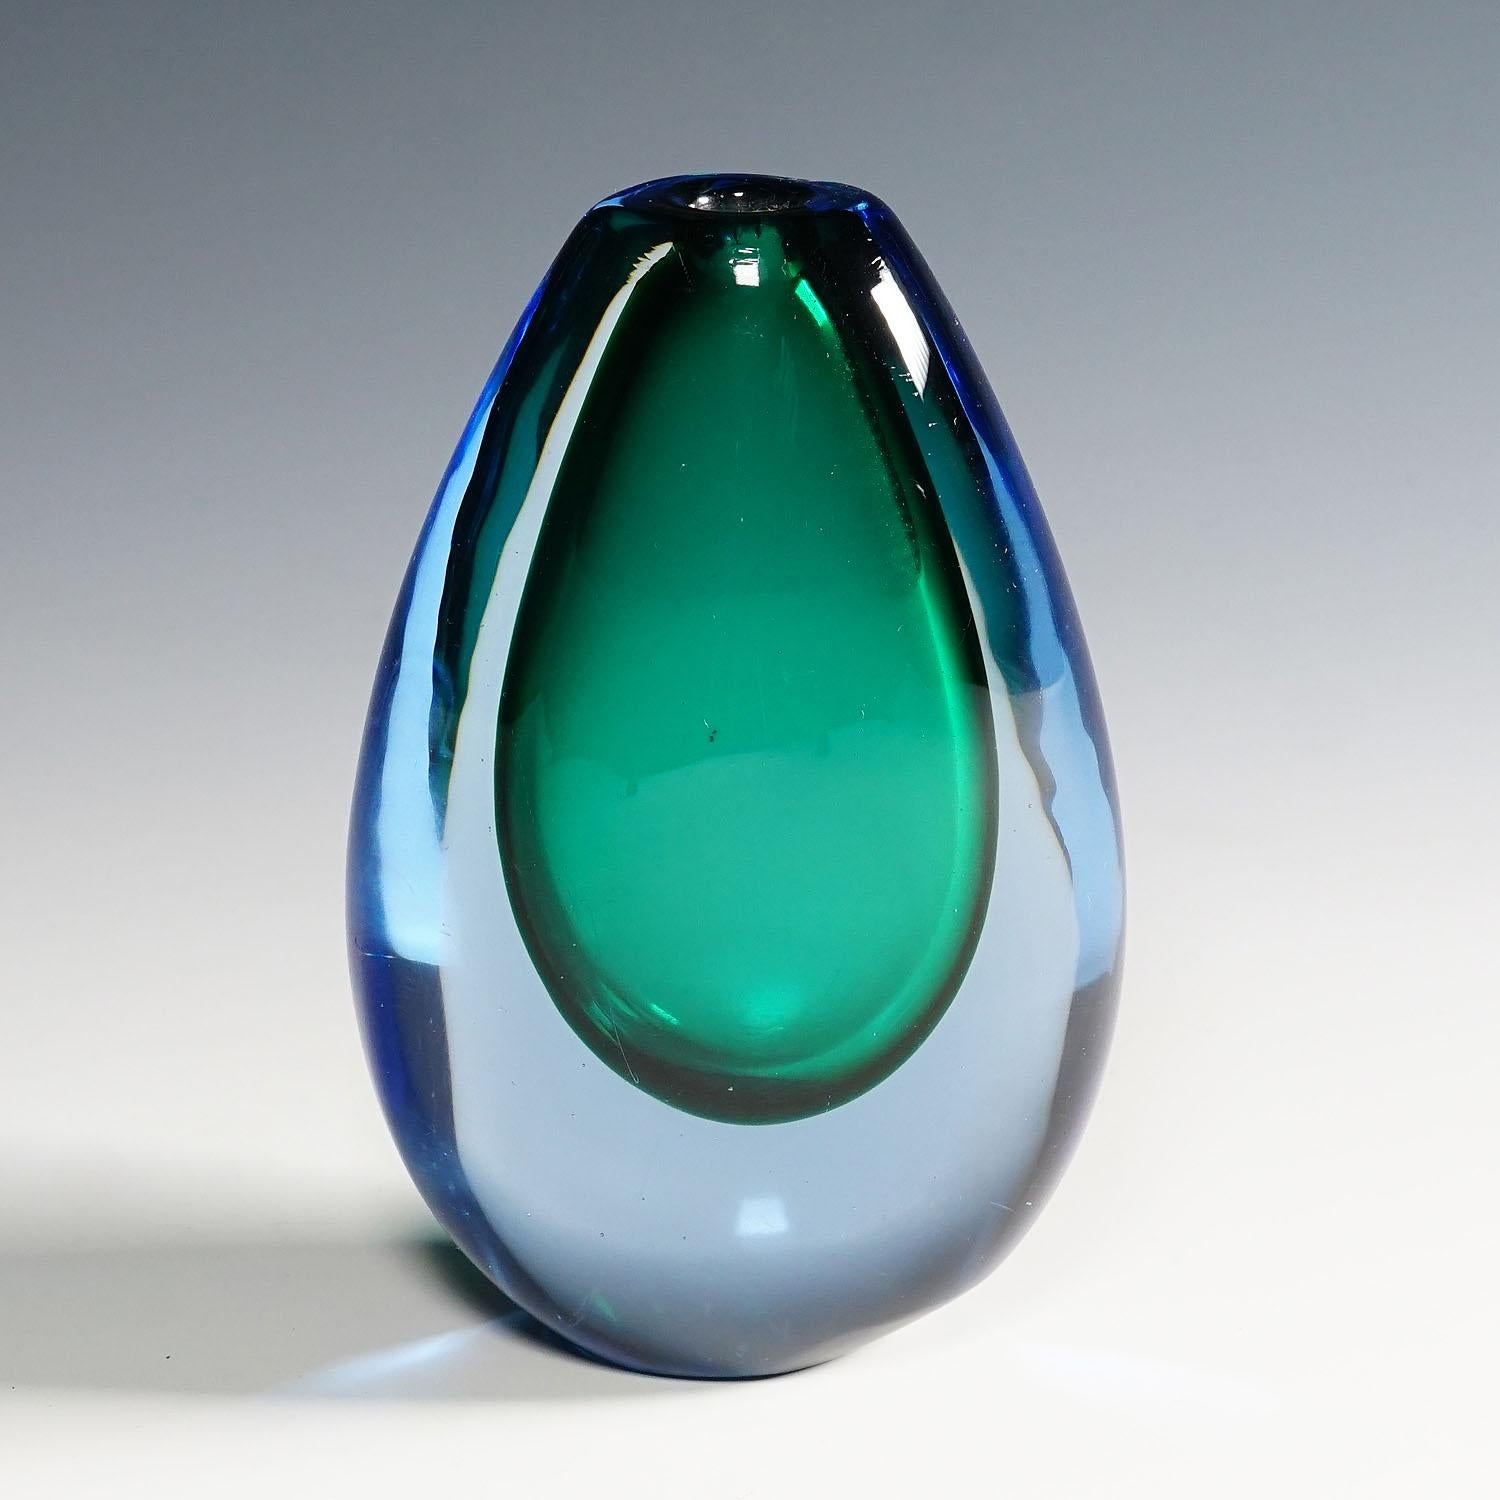 Mid-Century Modern Vintage Murano Sommerso Glass Vase by Lugiano Gaspari for Salviati & Co. 1960s